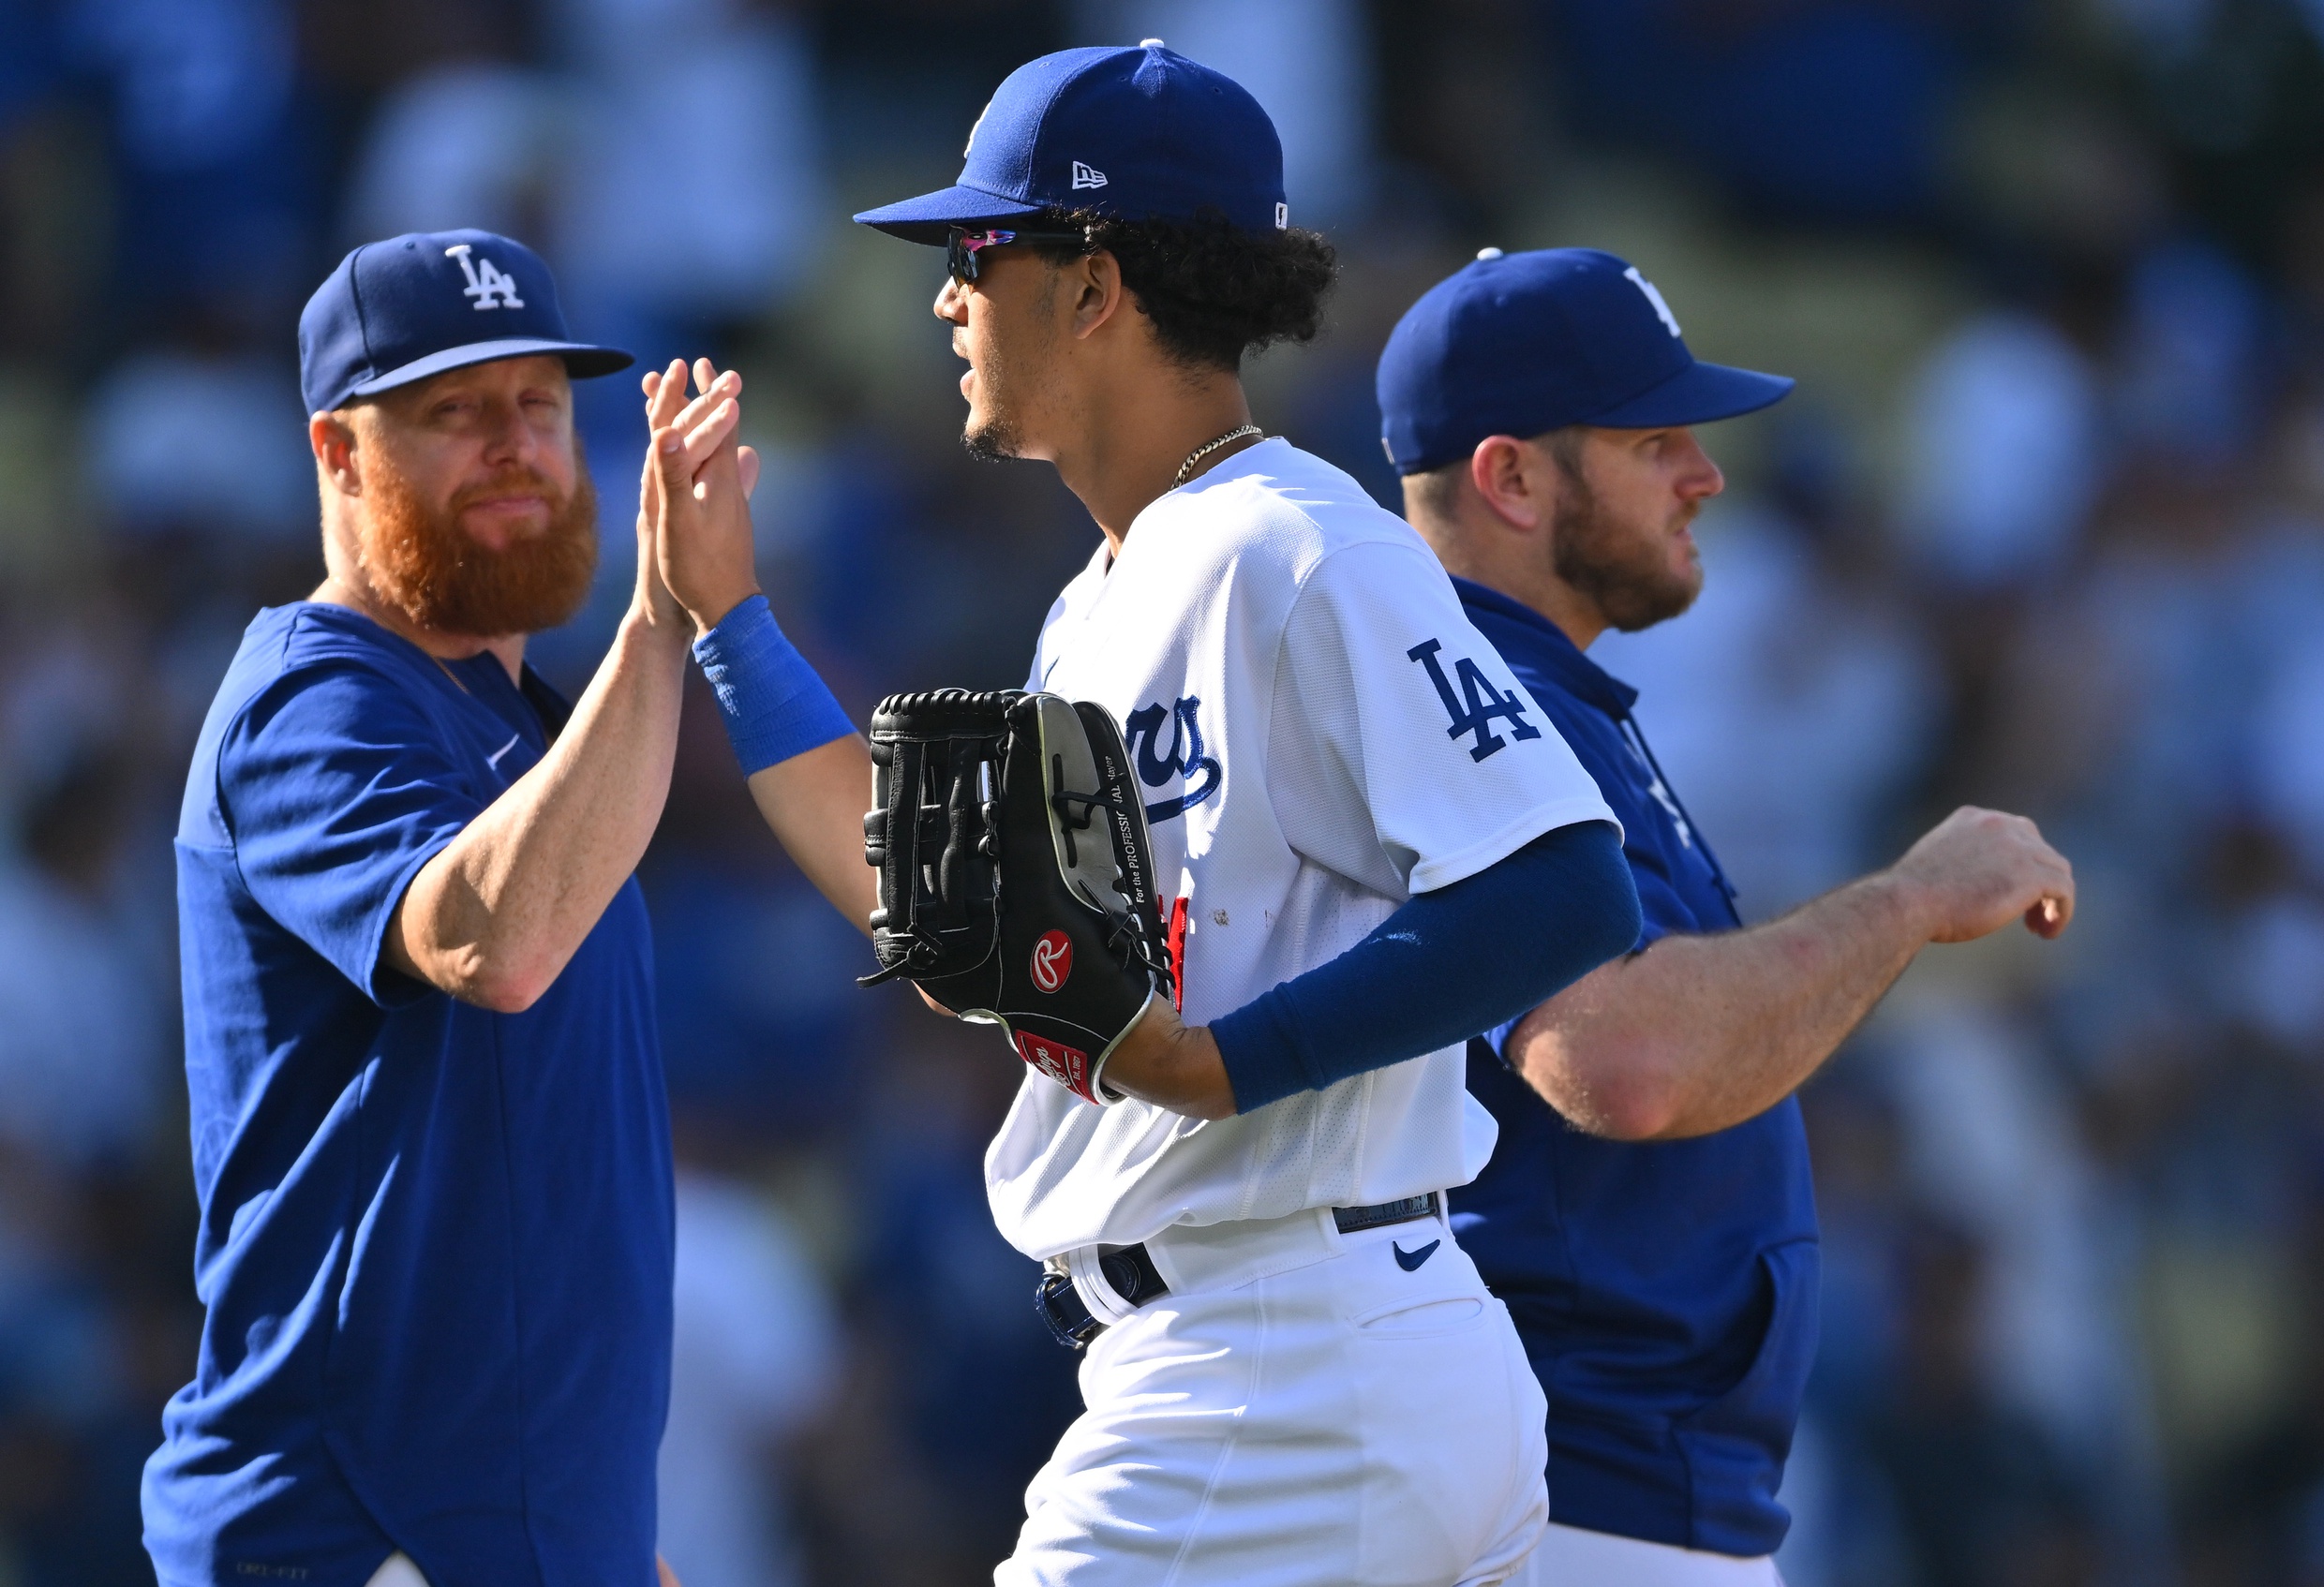 Where does Diego Cartaya fit into the Dodgers' future plans? - Los